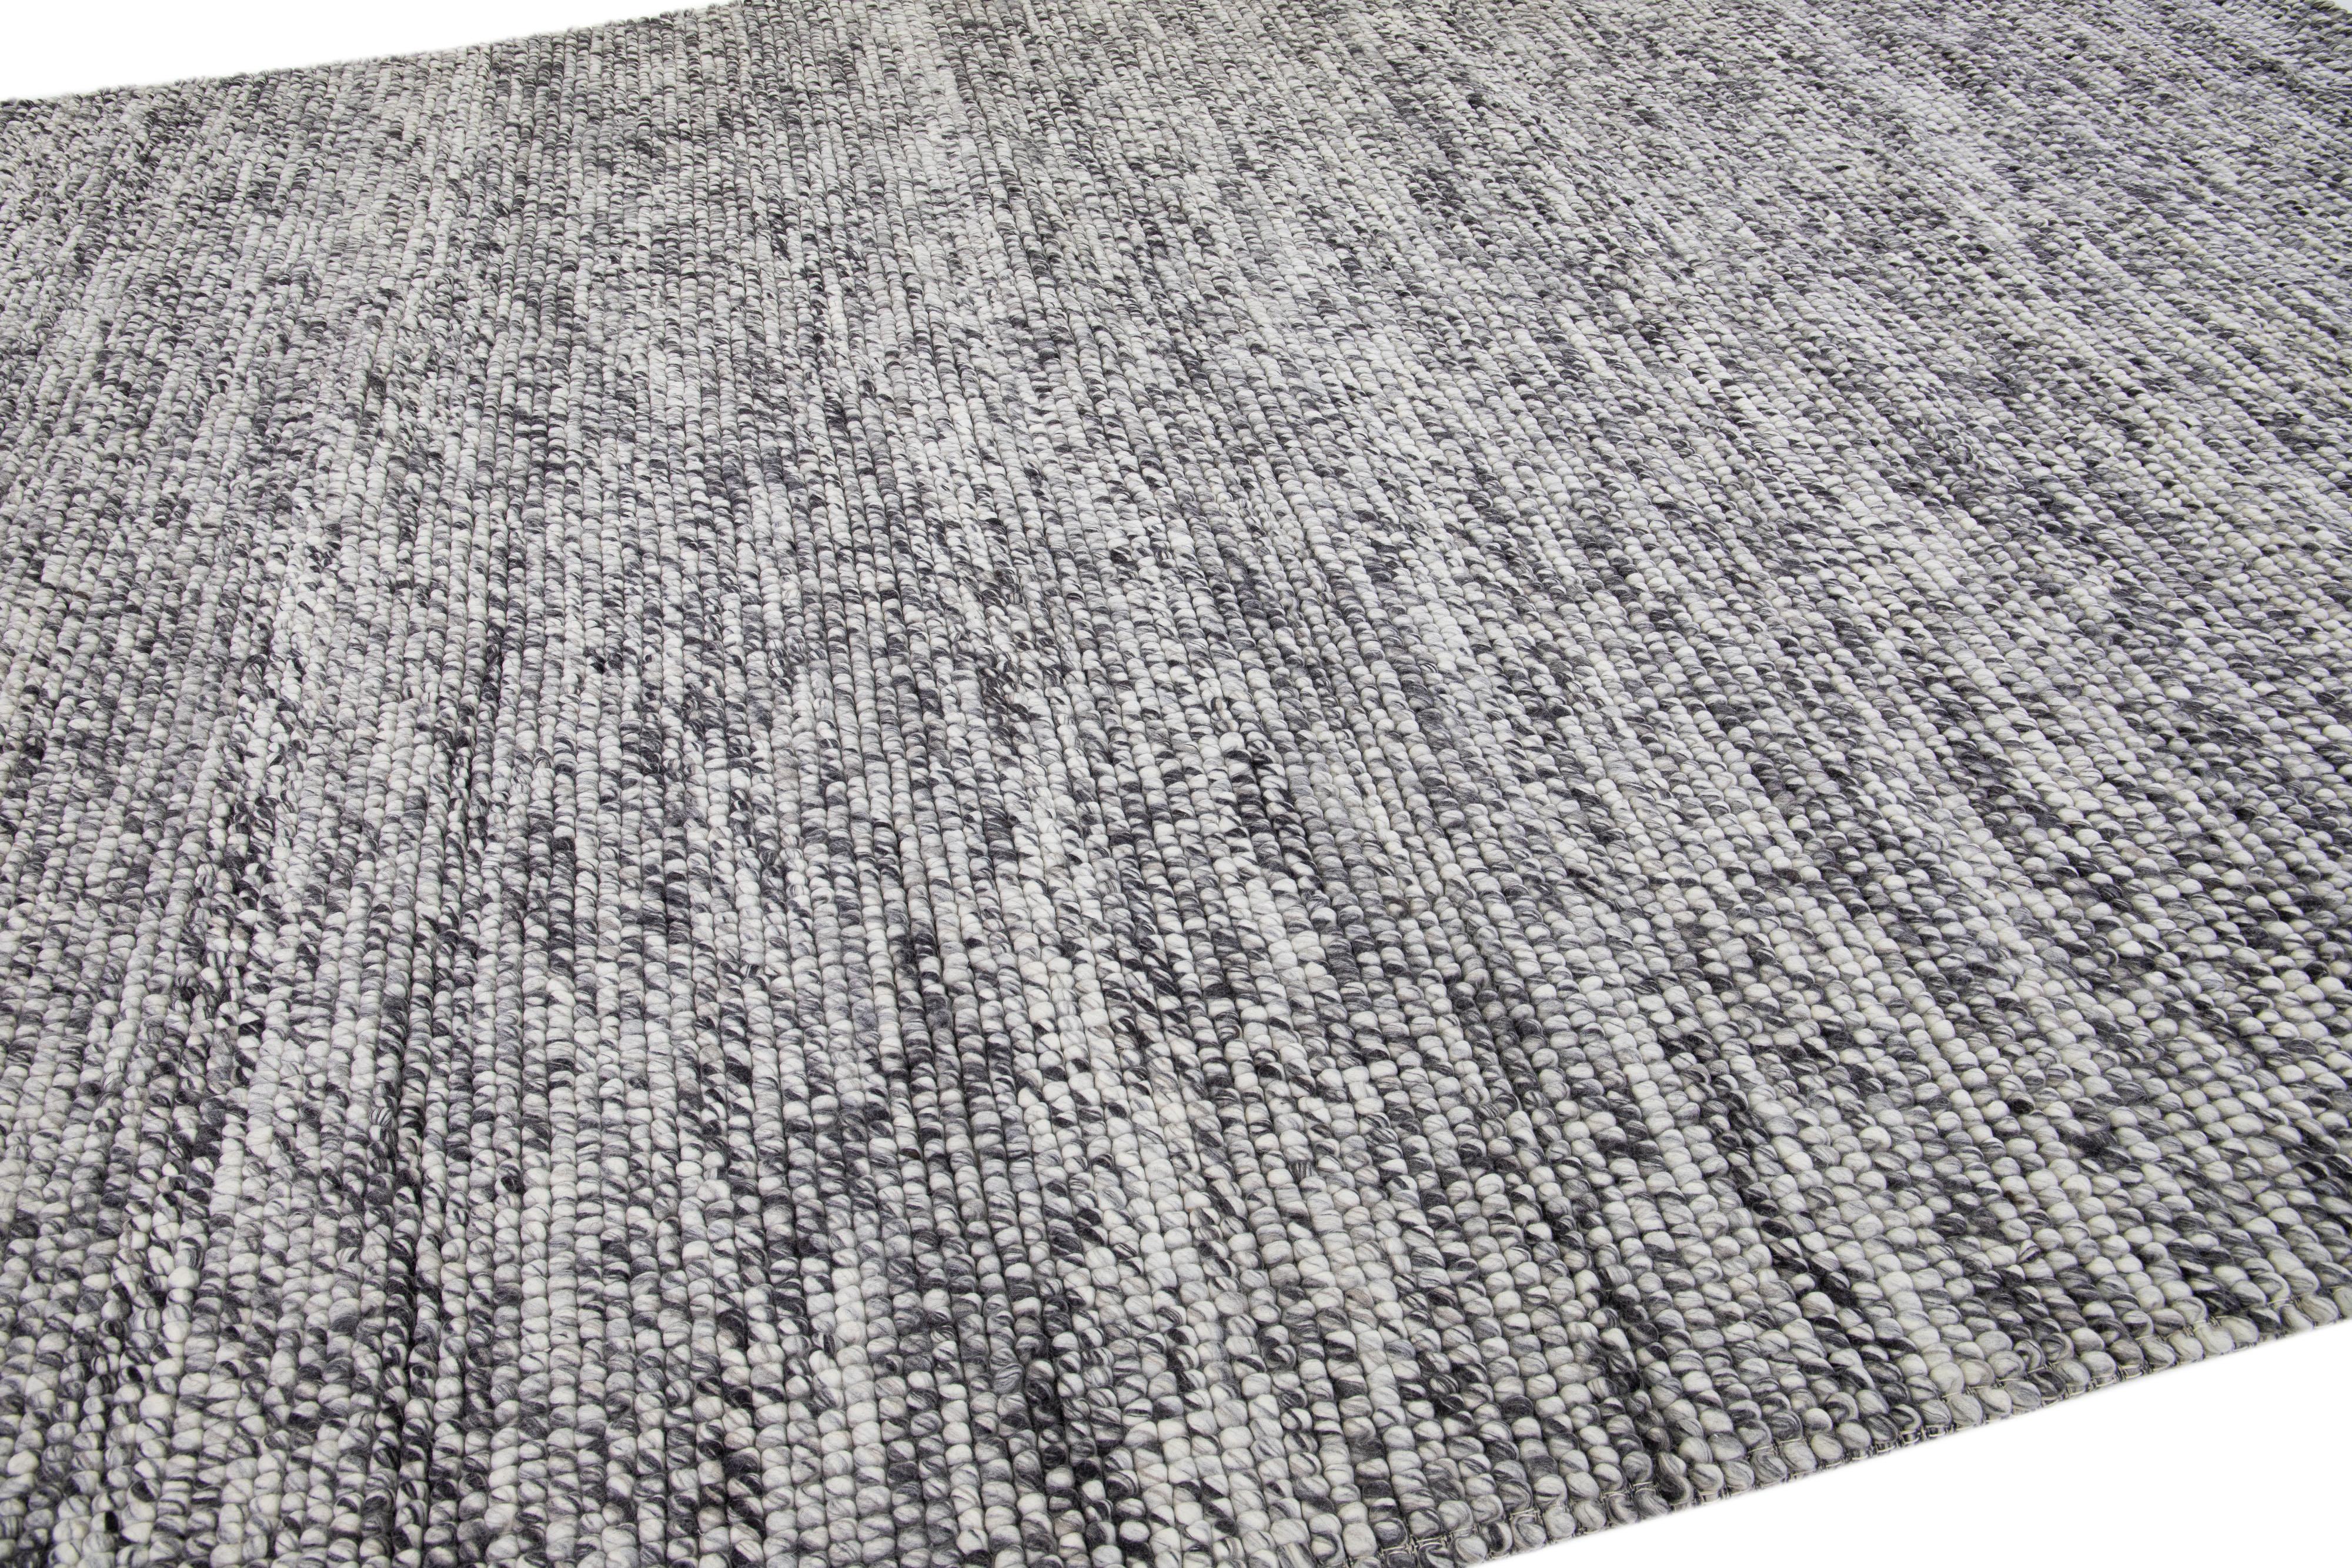 This beautiful Felt hand-woven wool rug is part of our Westport Collection with a gray color field and features an all-over geometric design.

This rug measures: 10' x 14'.

Custom colors and sizes are available upon request.

